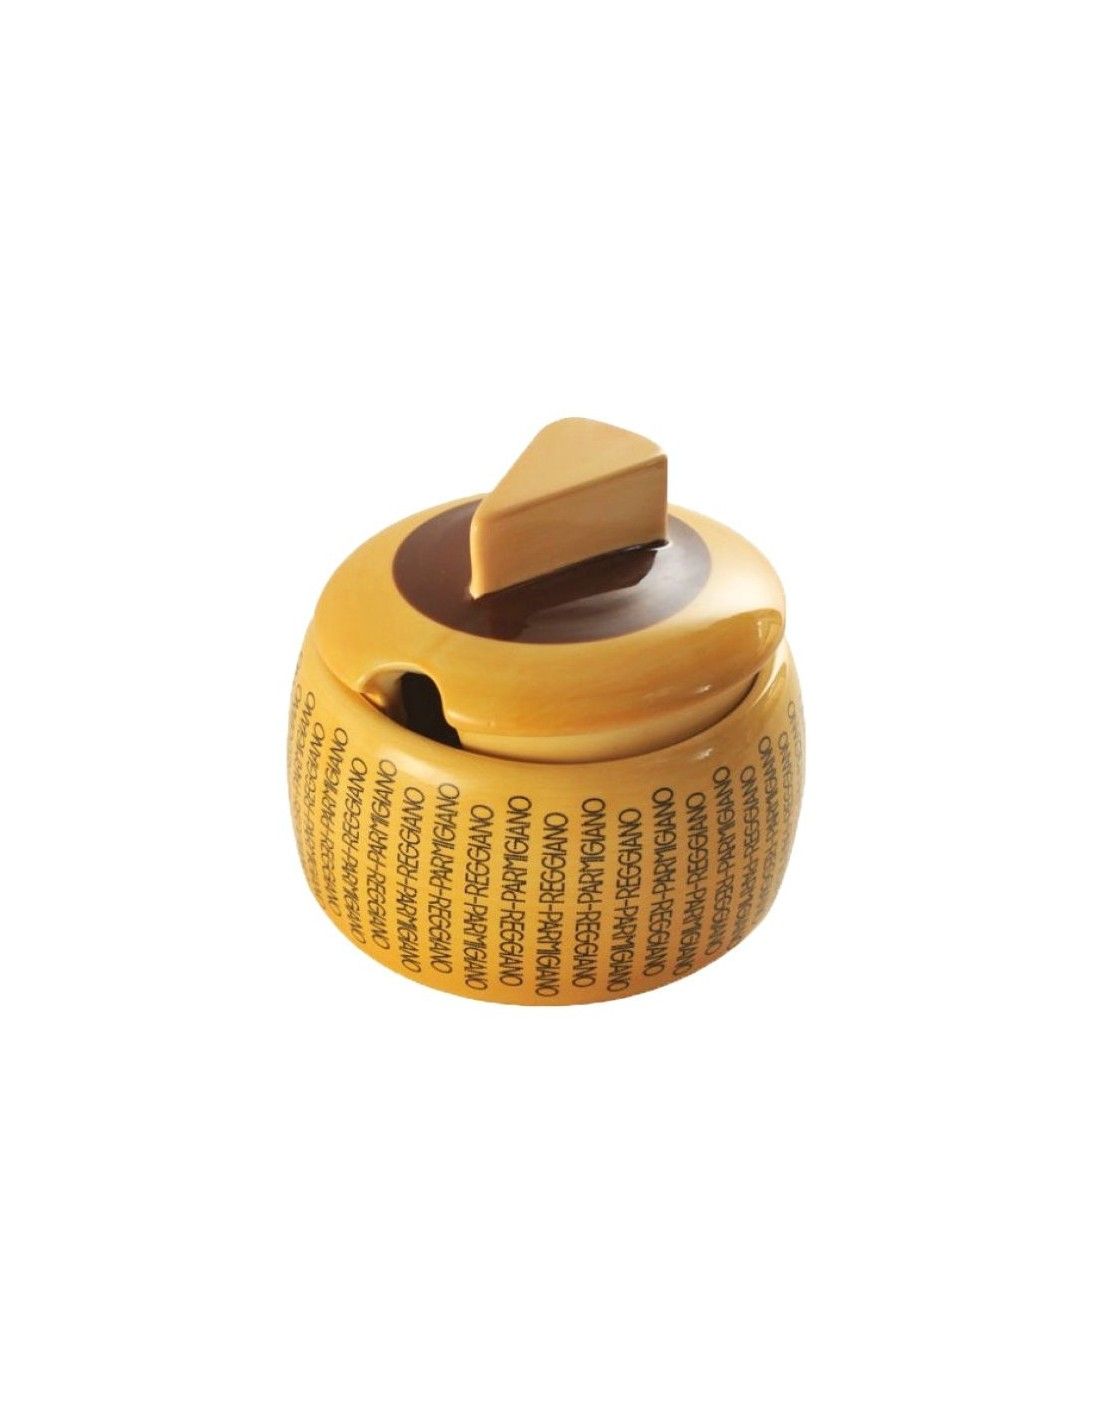 https://www.parmashop.com/3383-thickbox_default/parmigiano-reggiano-pdo-wooden-cheeseater-ceramic-box-for-cheese-littl.jpg